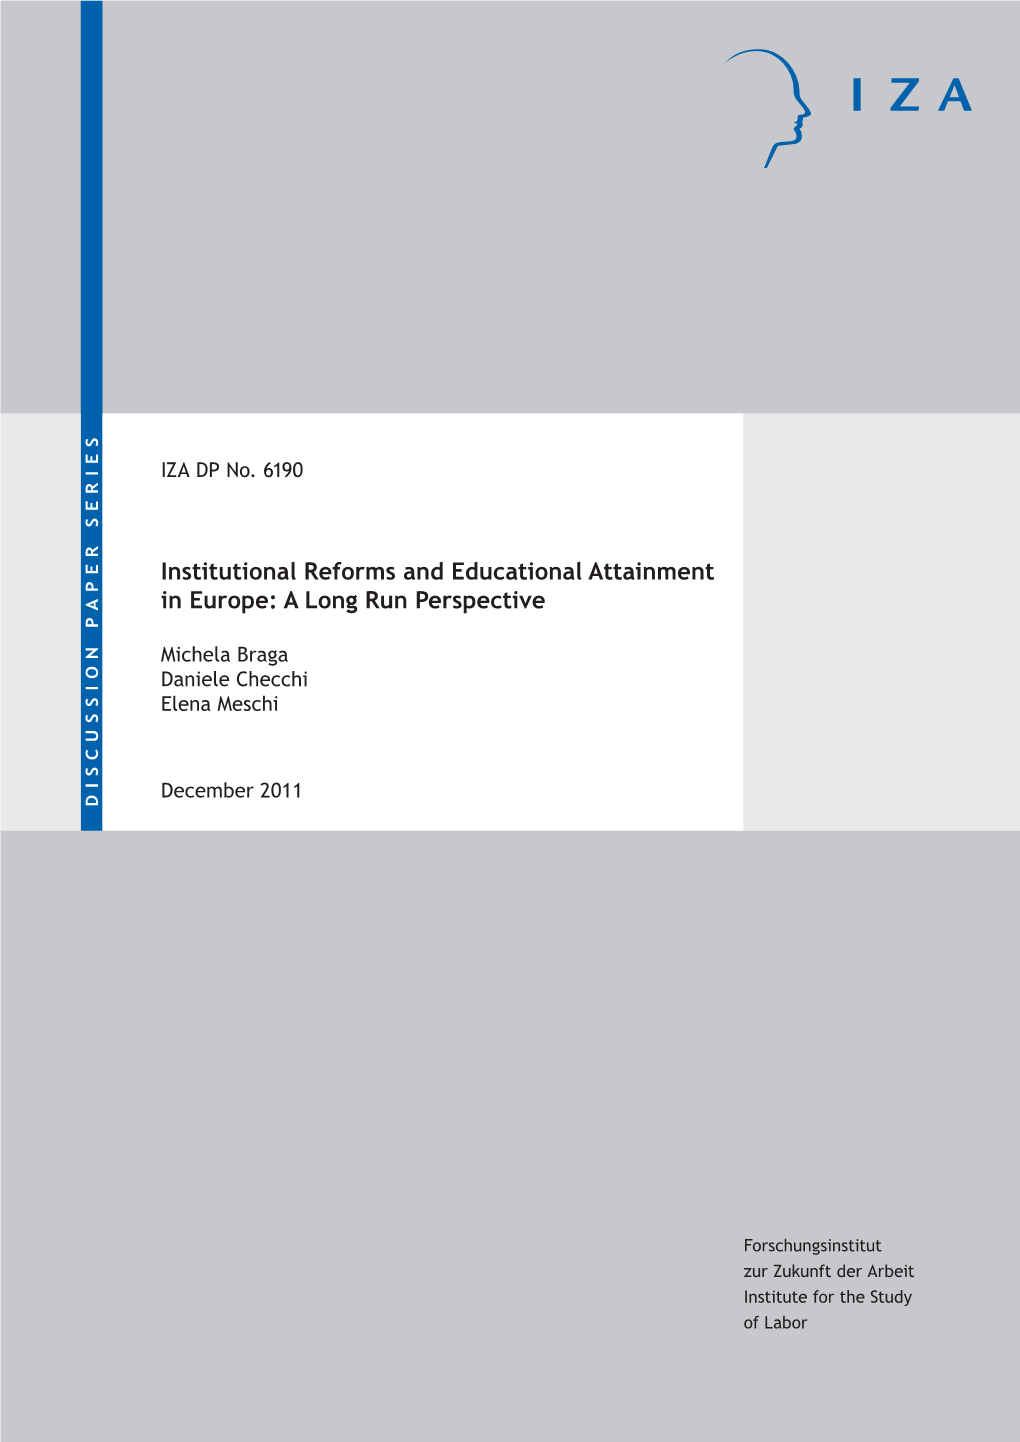 Institutional Reforms and Educational Attainment in Europe: a Long Run Perspective